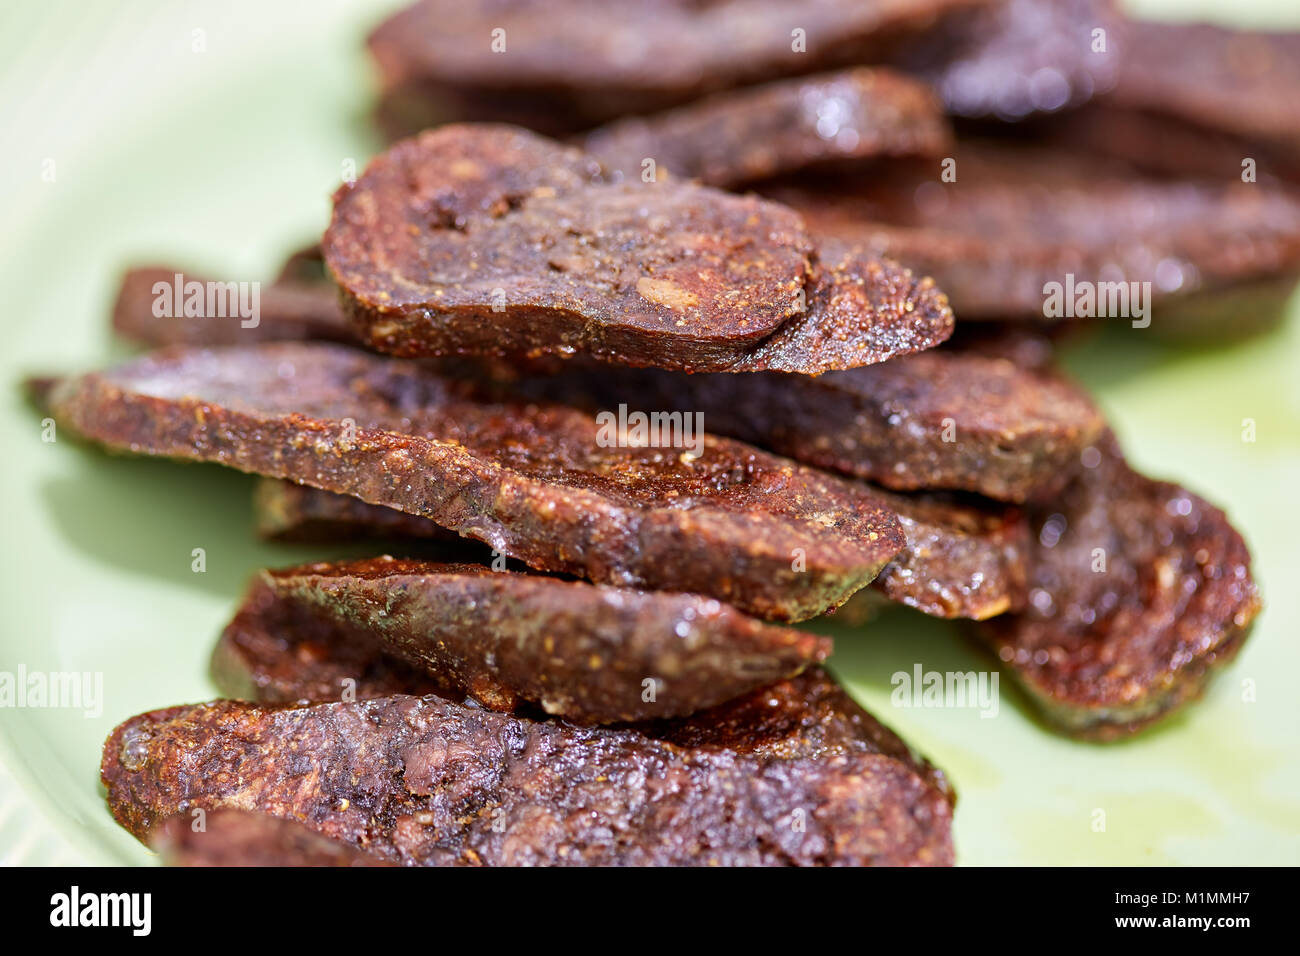 Turkish göden sausage sliced and grilled in closeup Stock Photo